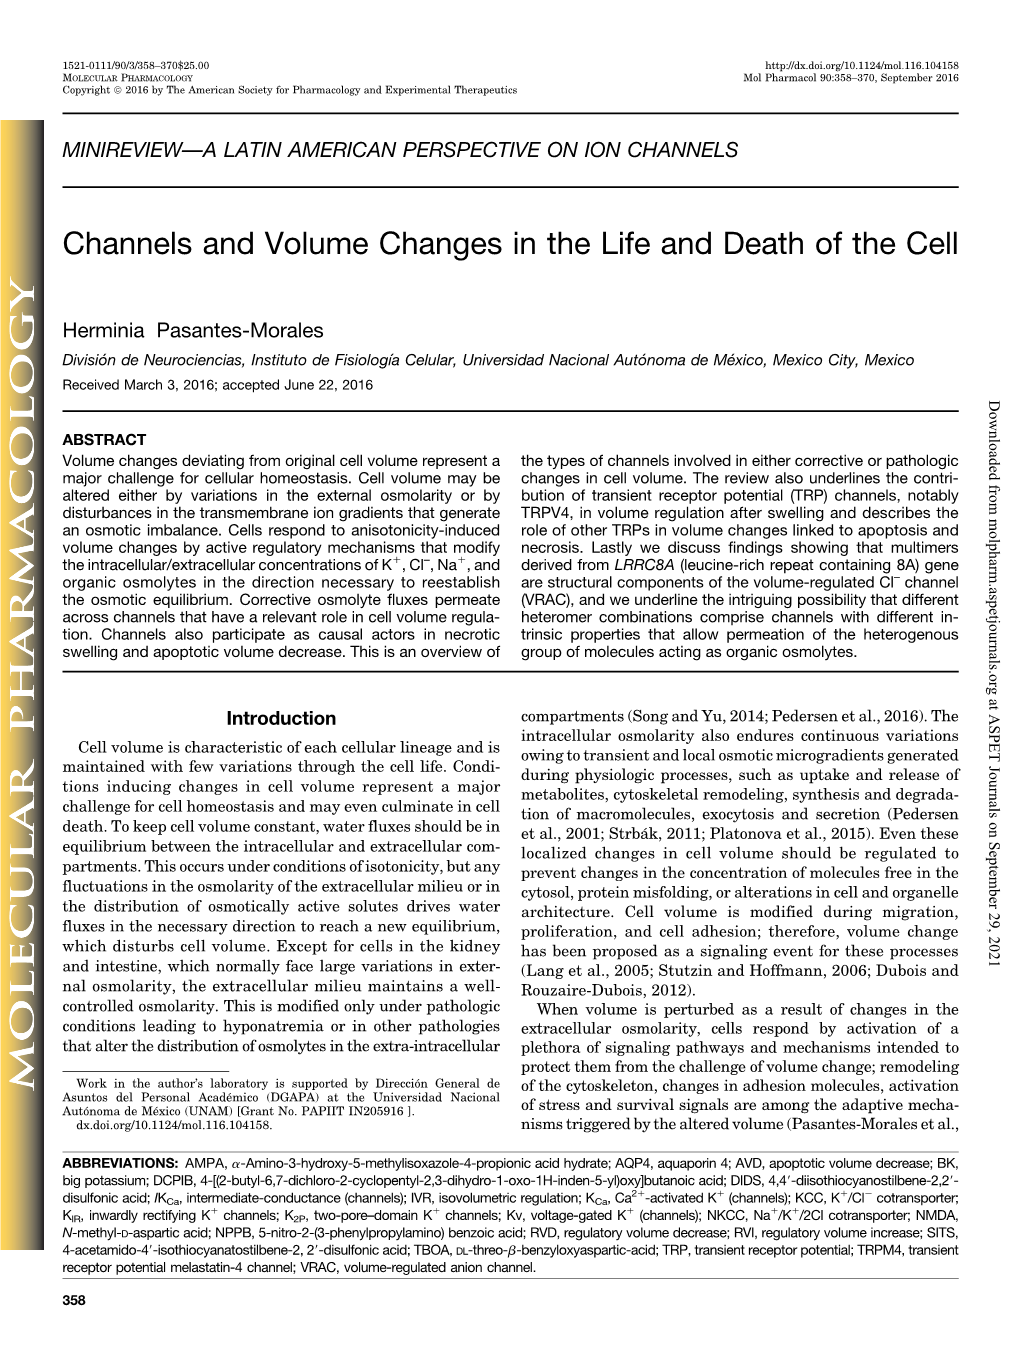 Channels and Volume Changes in the Life and Death of the Cell